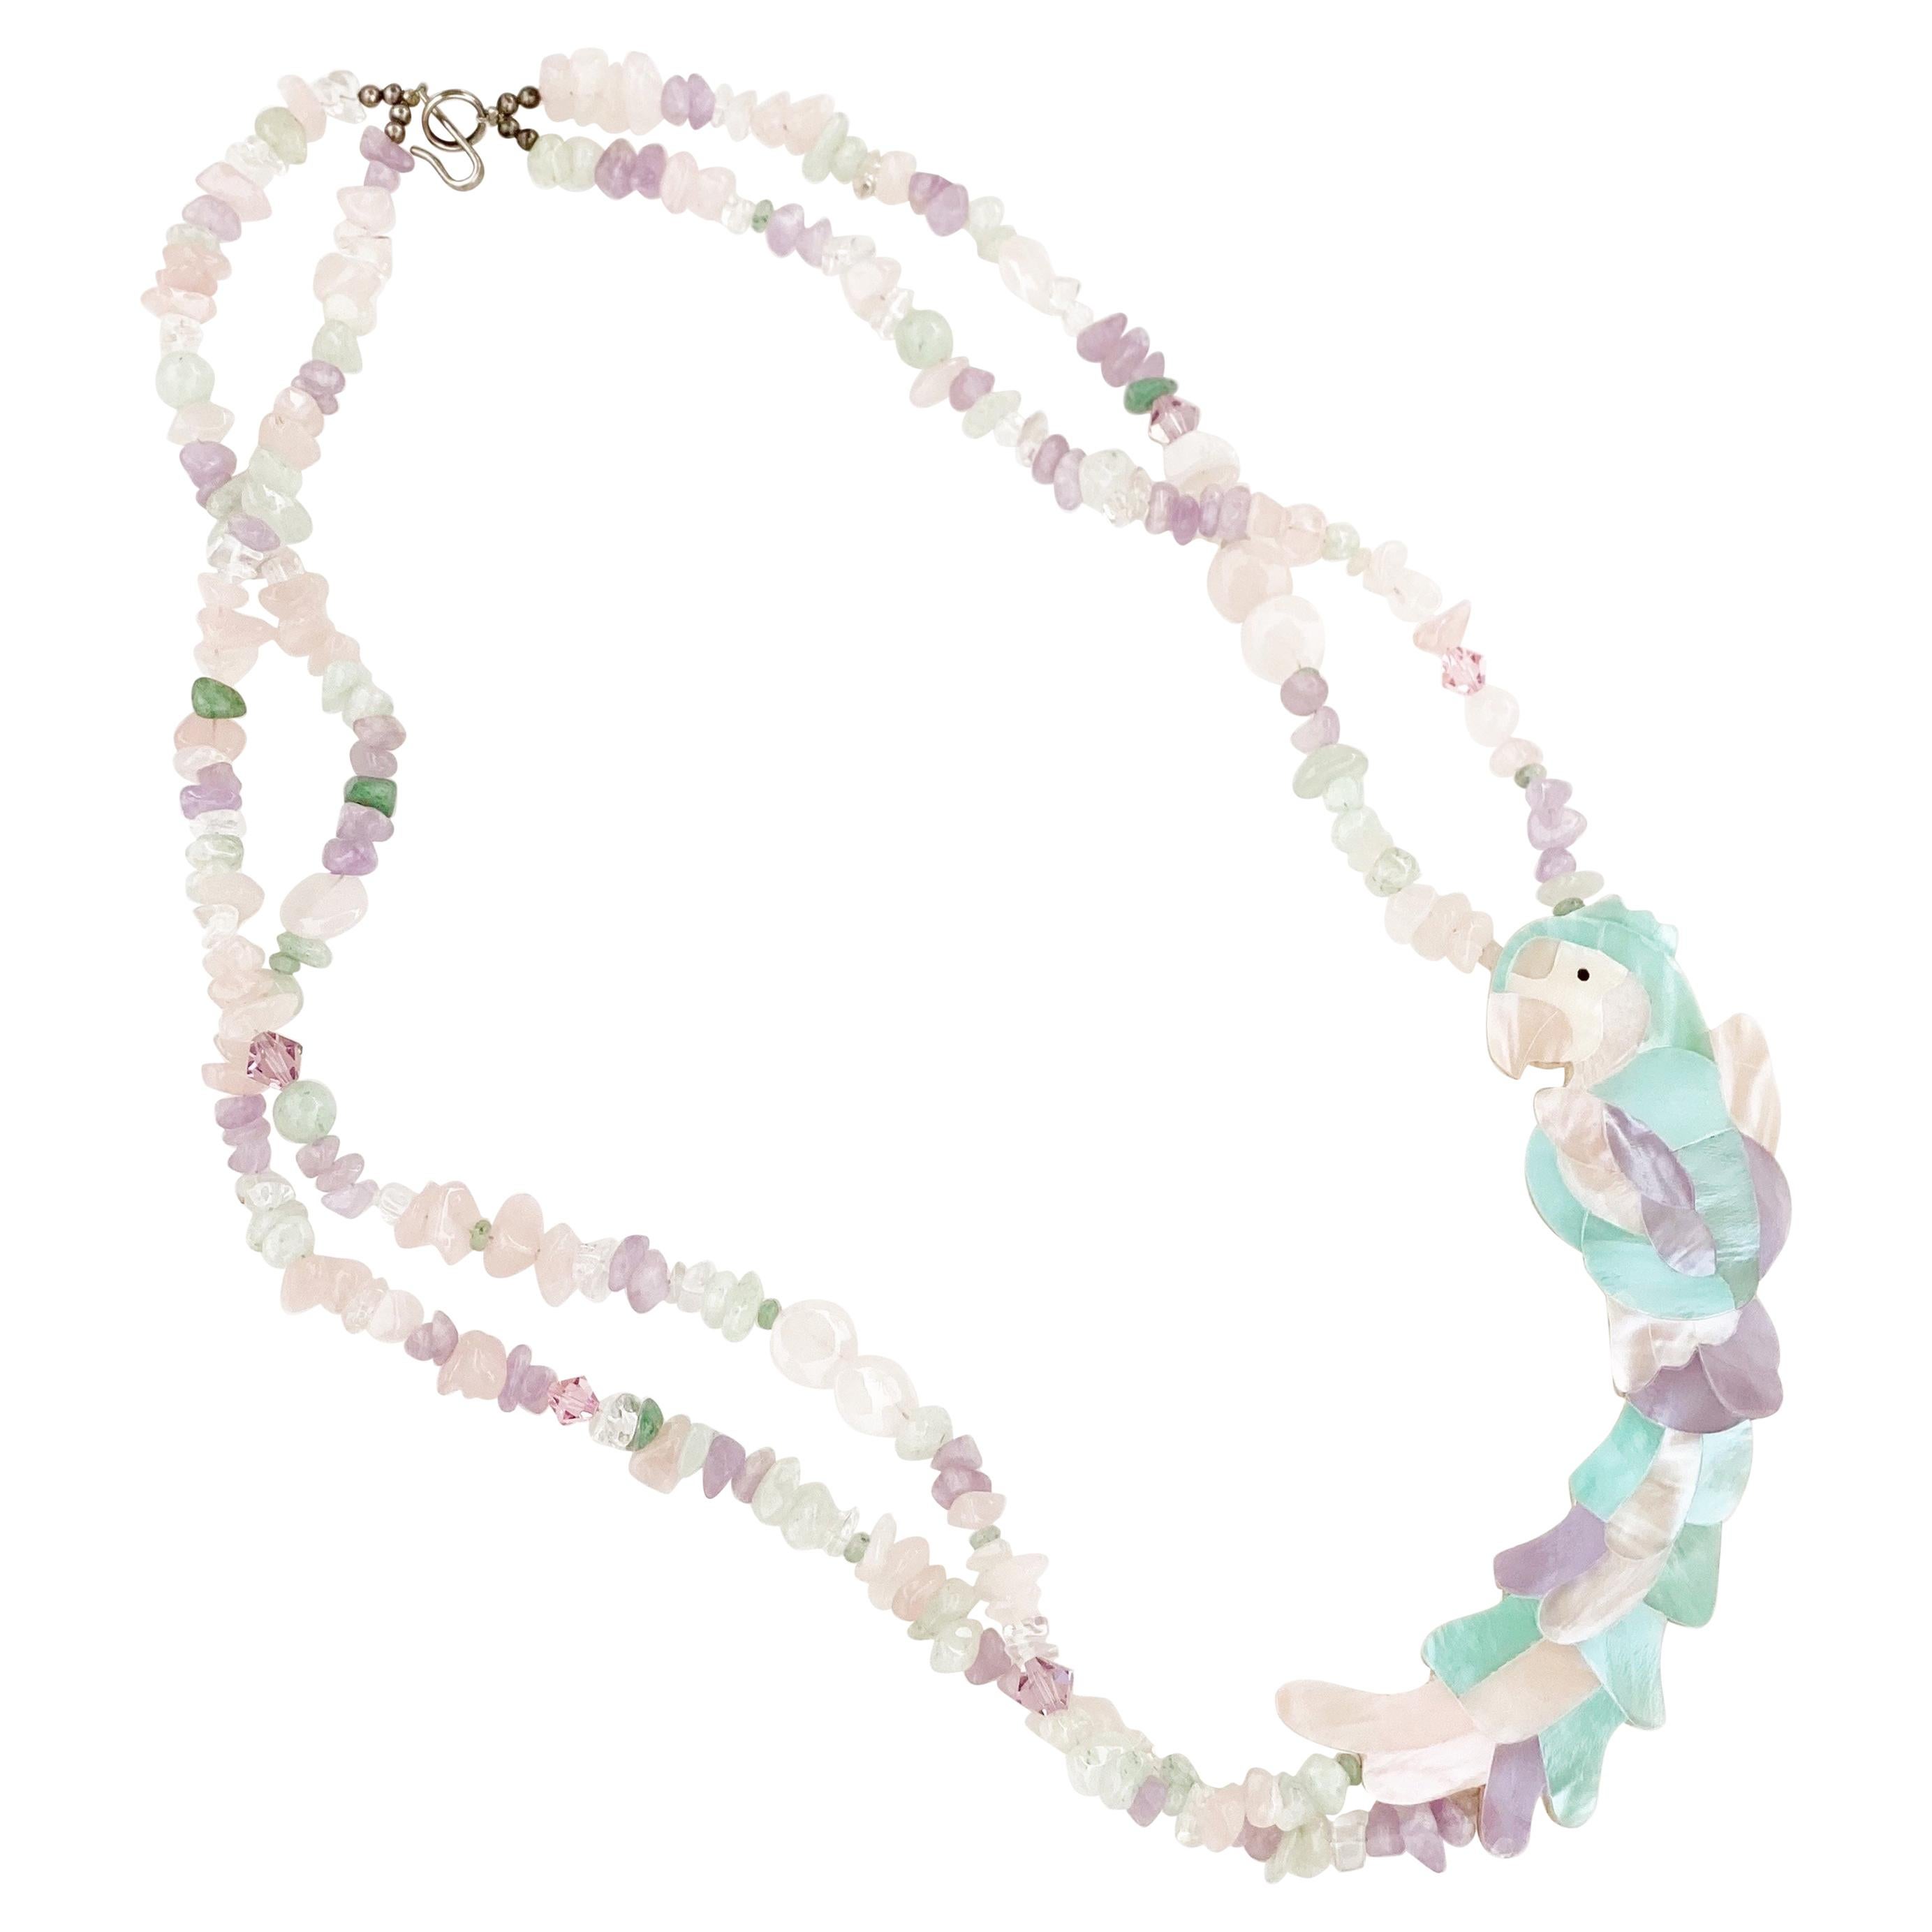 Pastel Mother of Pearl Parrot Necklace With Quartz Gemstones By Lee Sands, 1980s